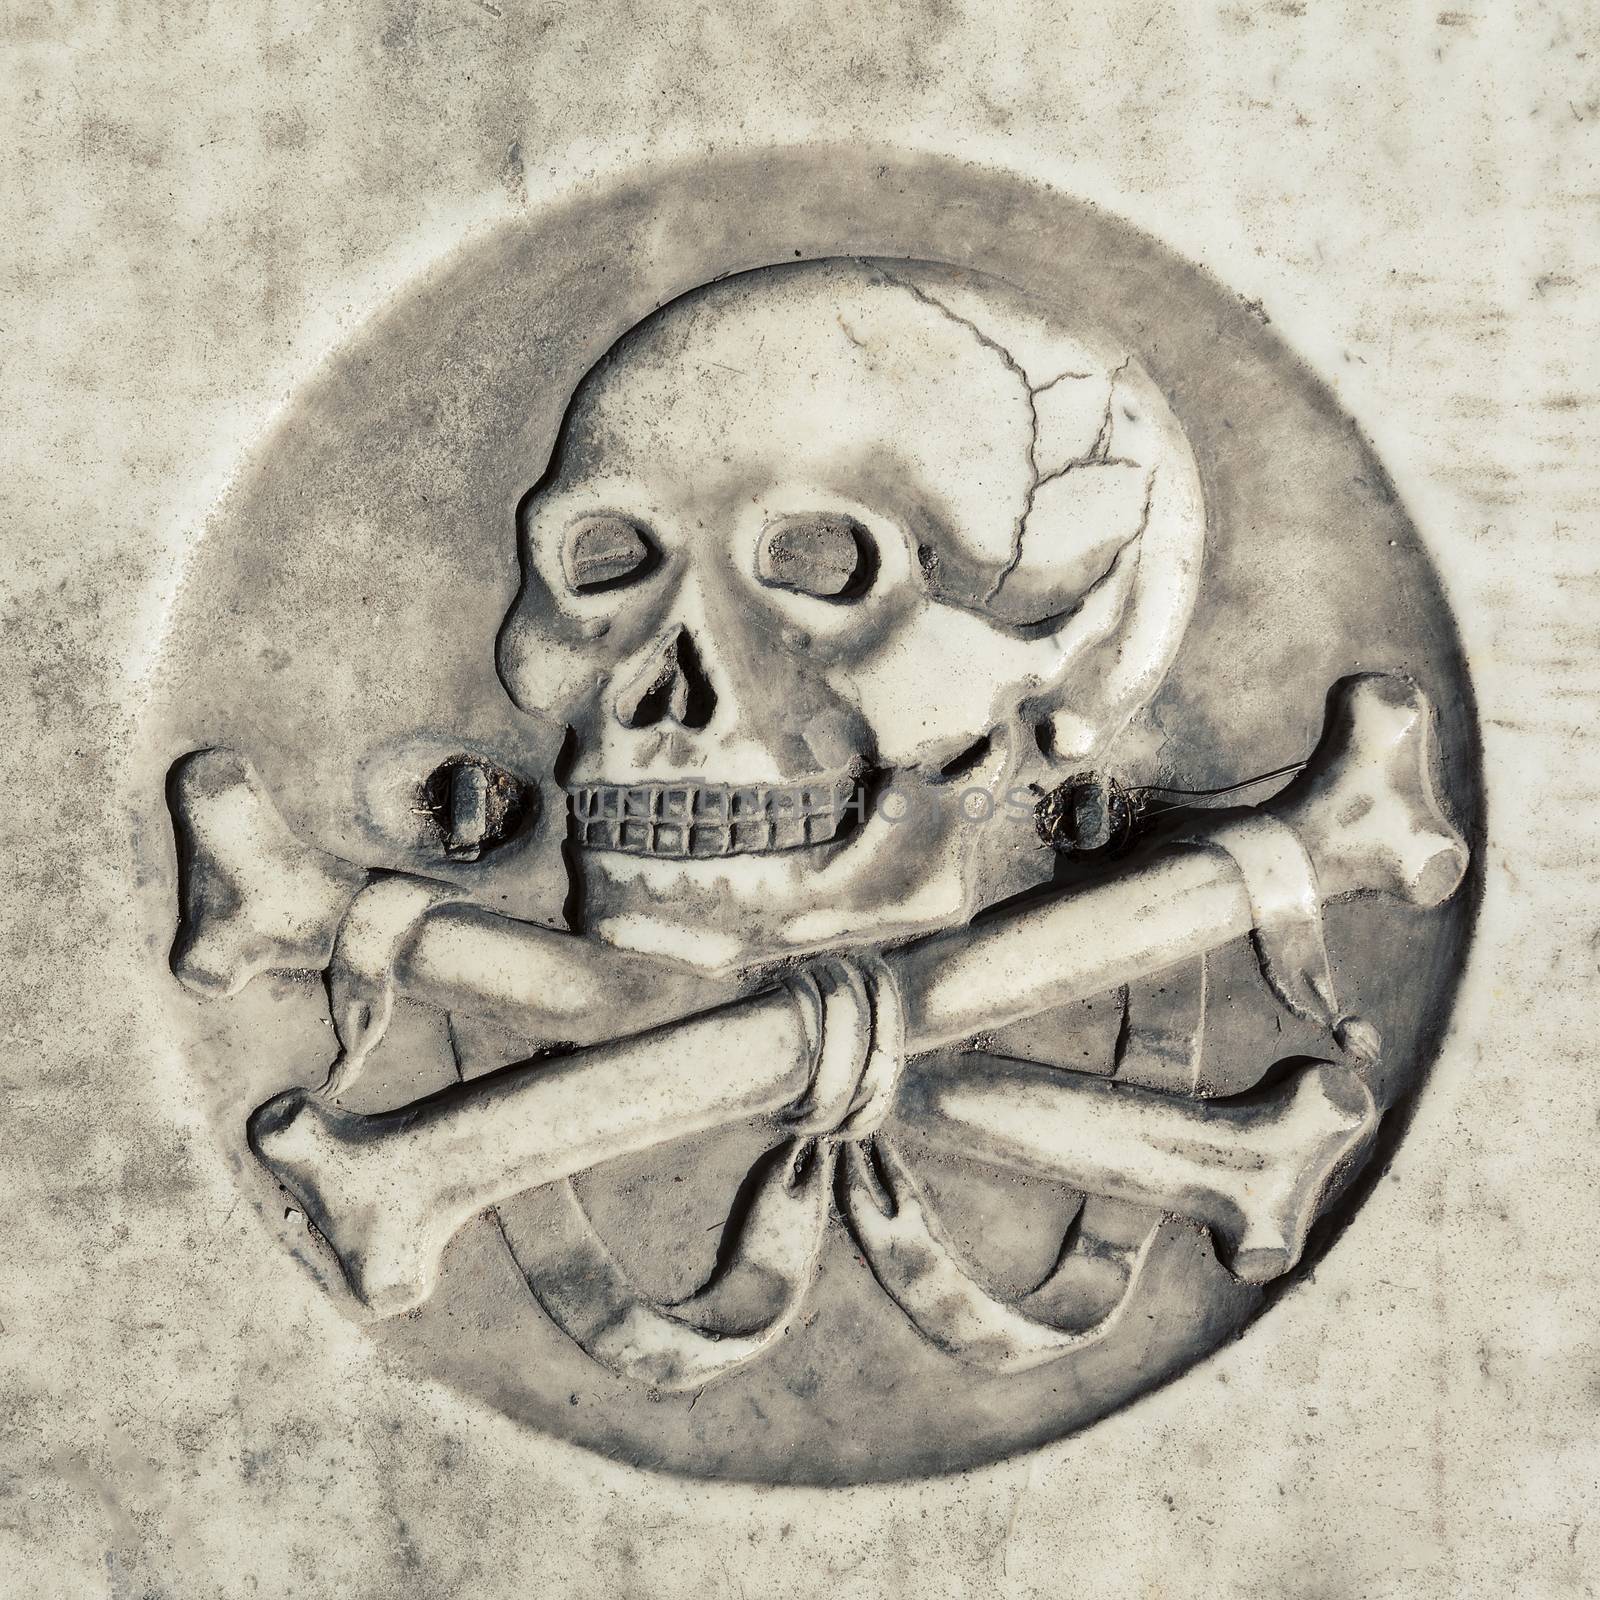 Skull in ancient tomb cemetery, and death symbol 